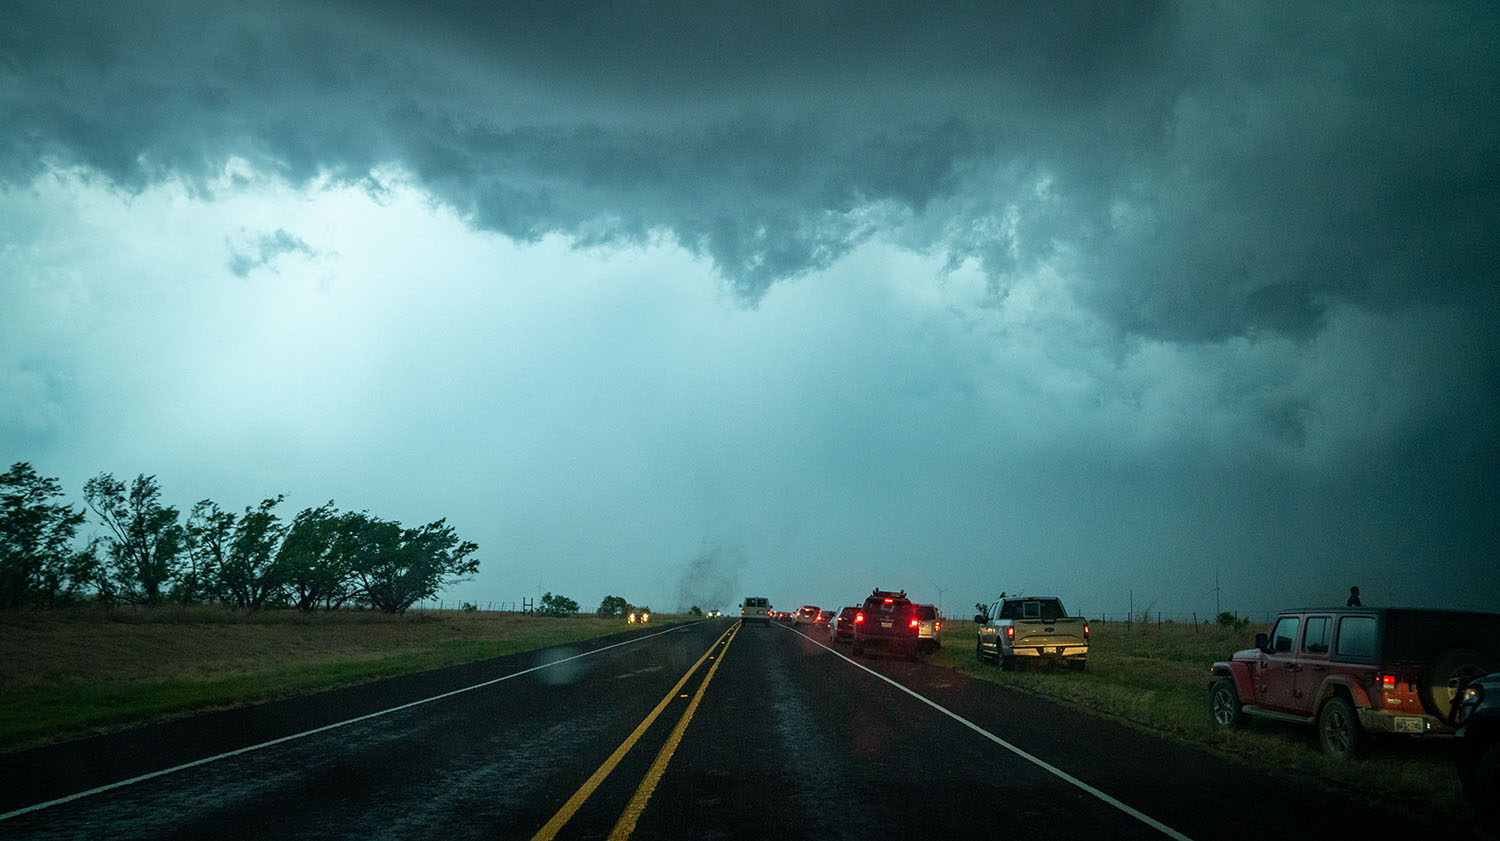 Storm chasers pulled off to the side of the road in Texas.